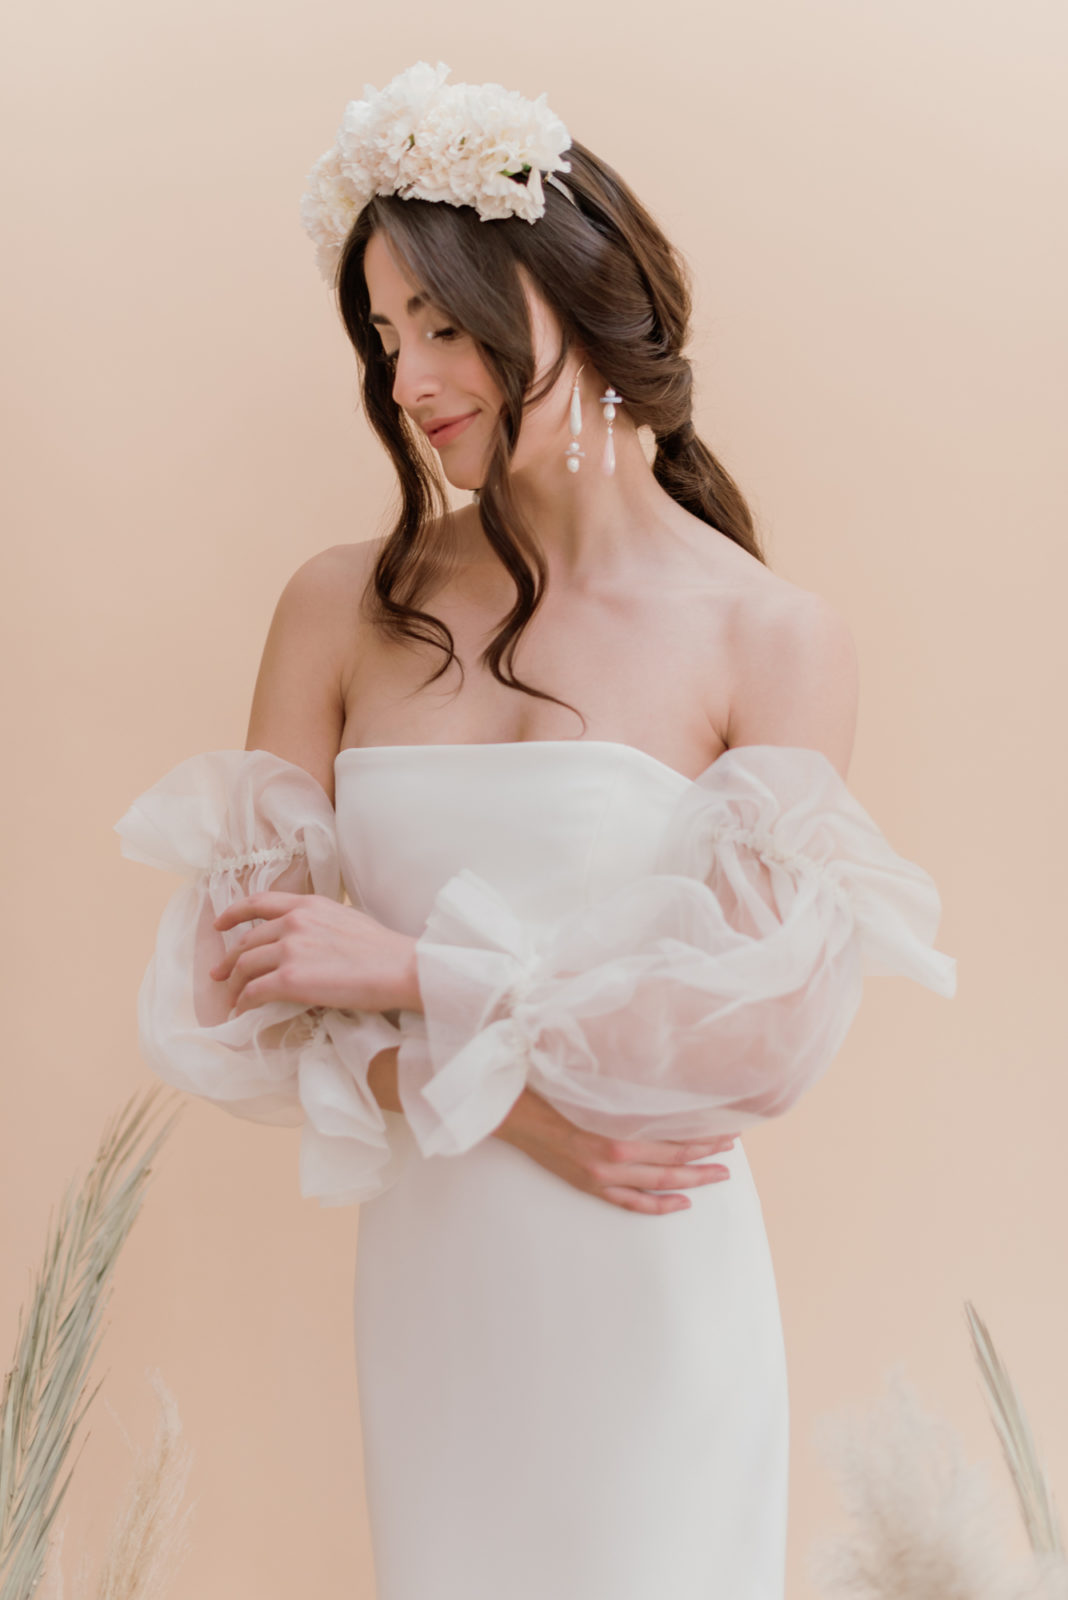 The Panacea gown by Aesling in a renaissance inspired bridal editorial 